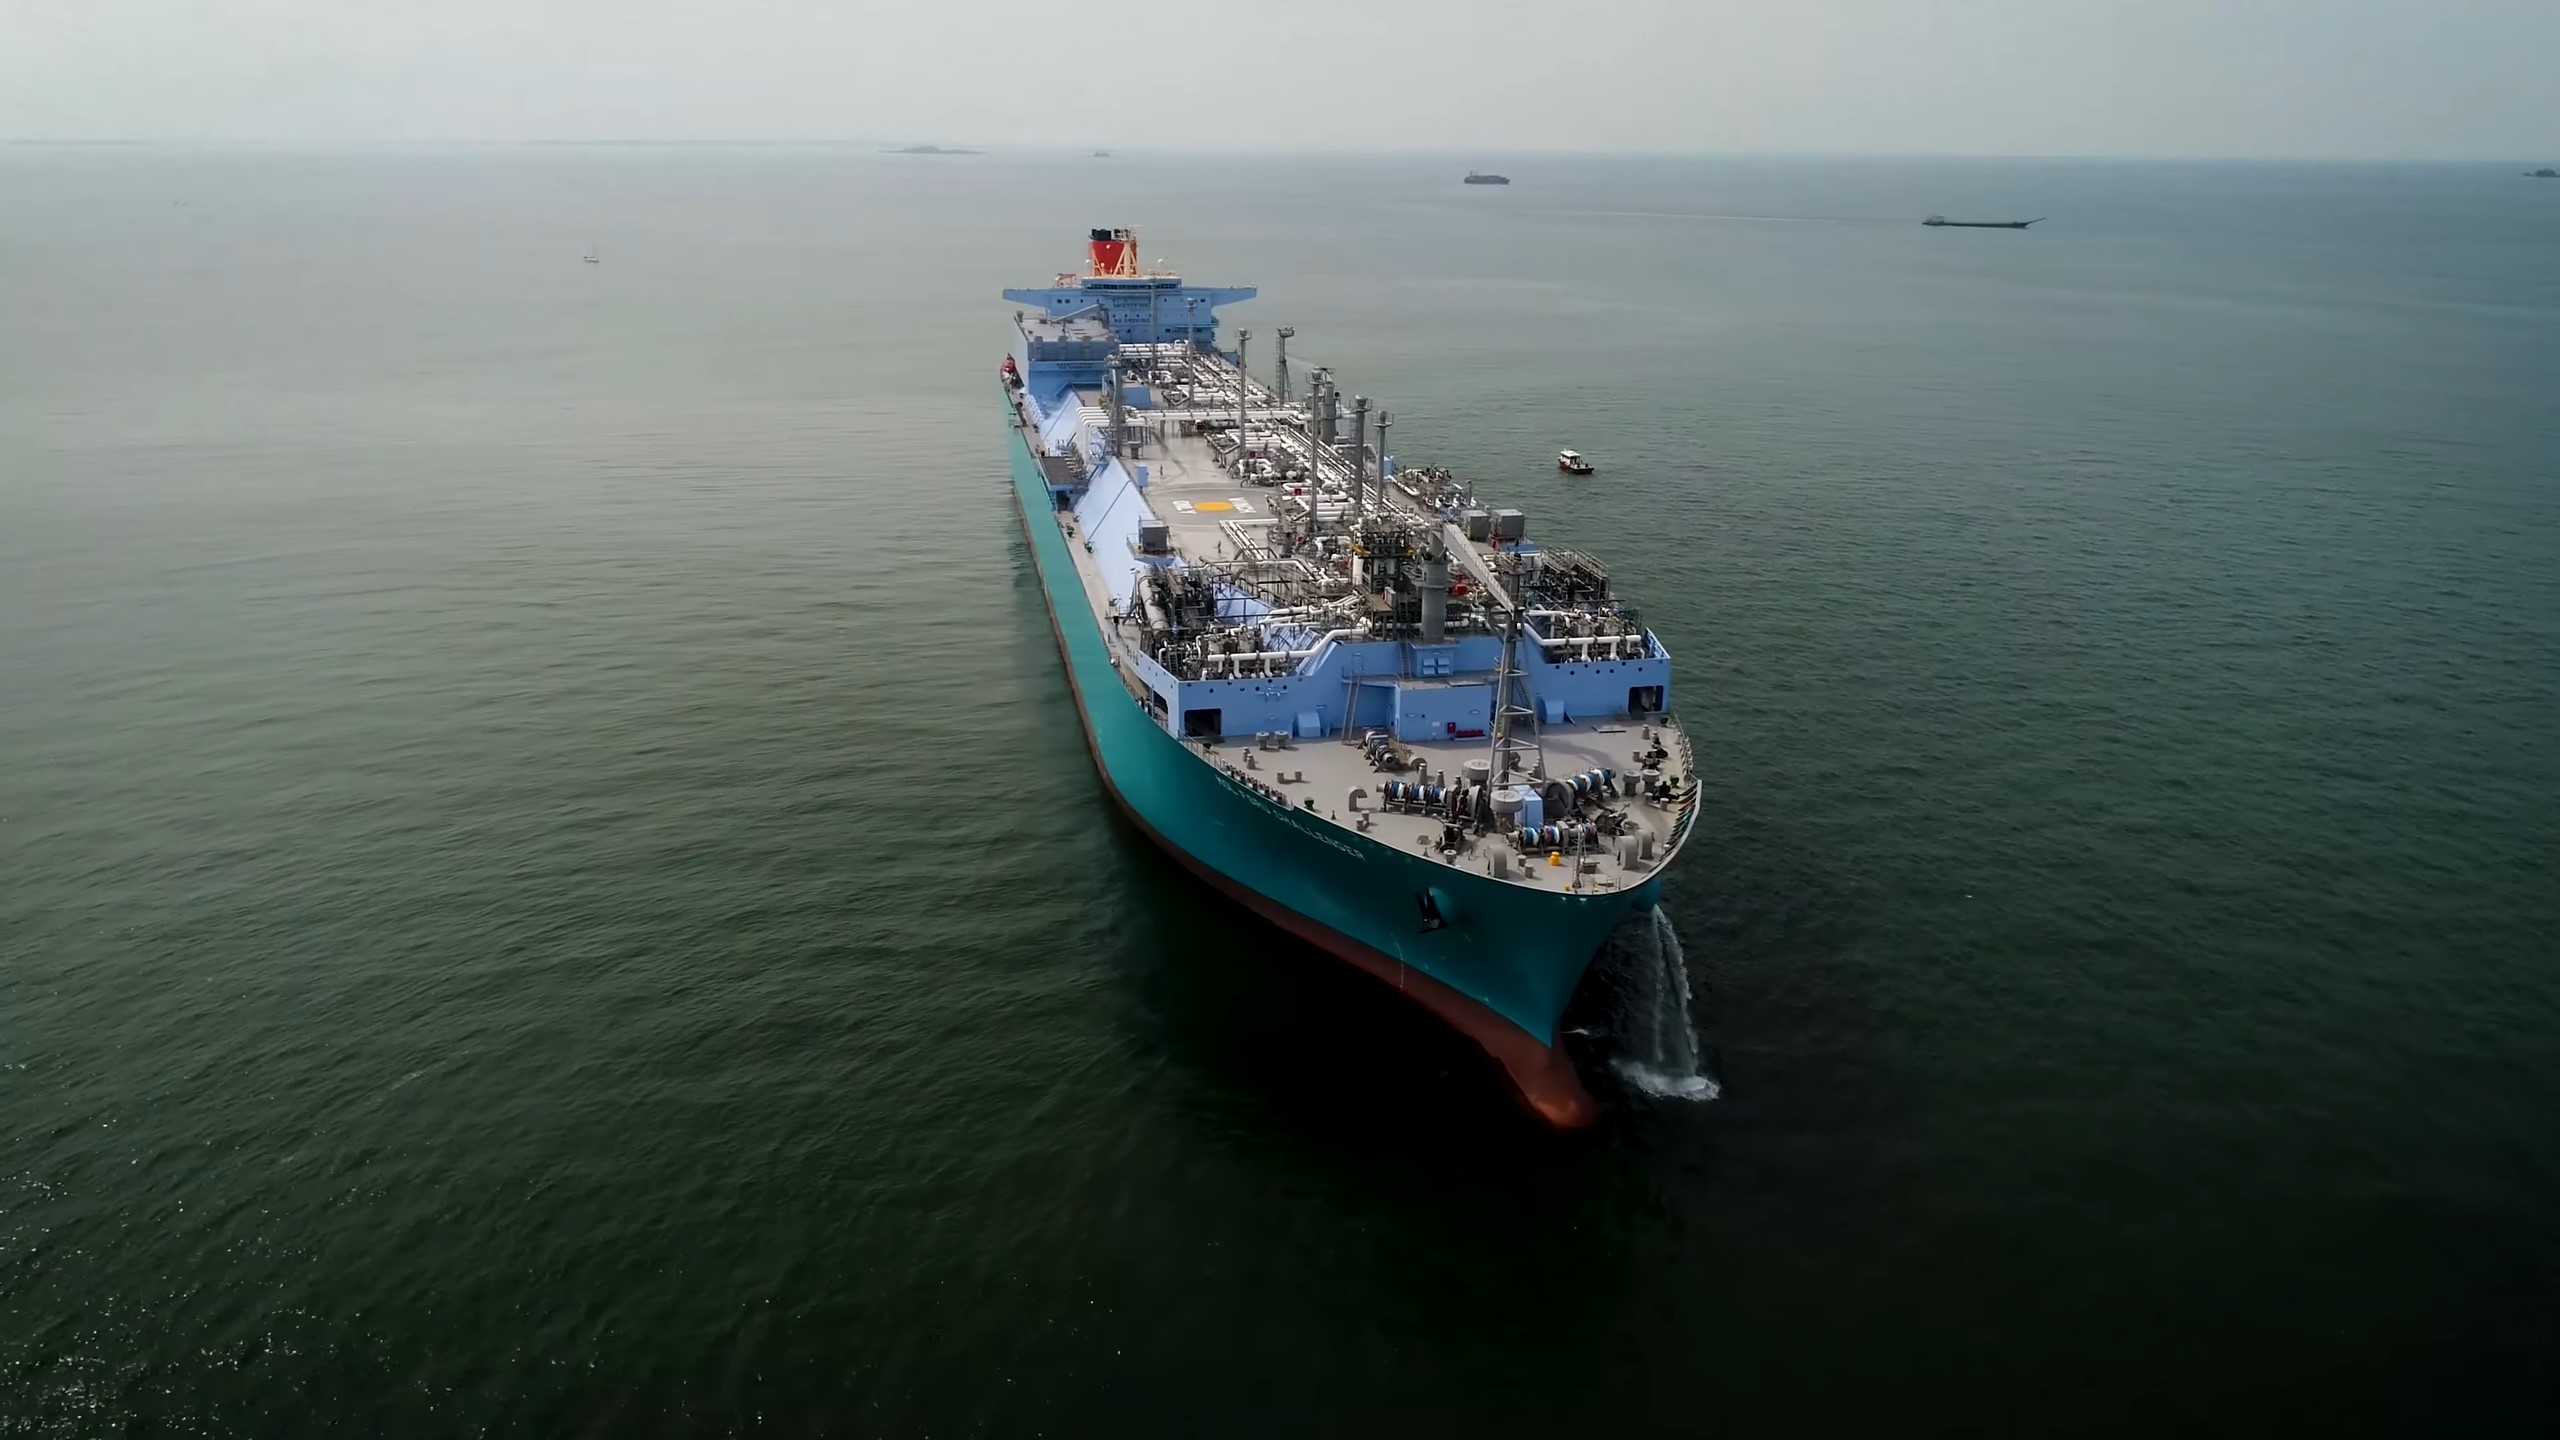 World's largest FSRU to arrive in Hong Kong this week